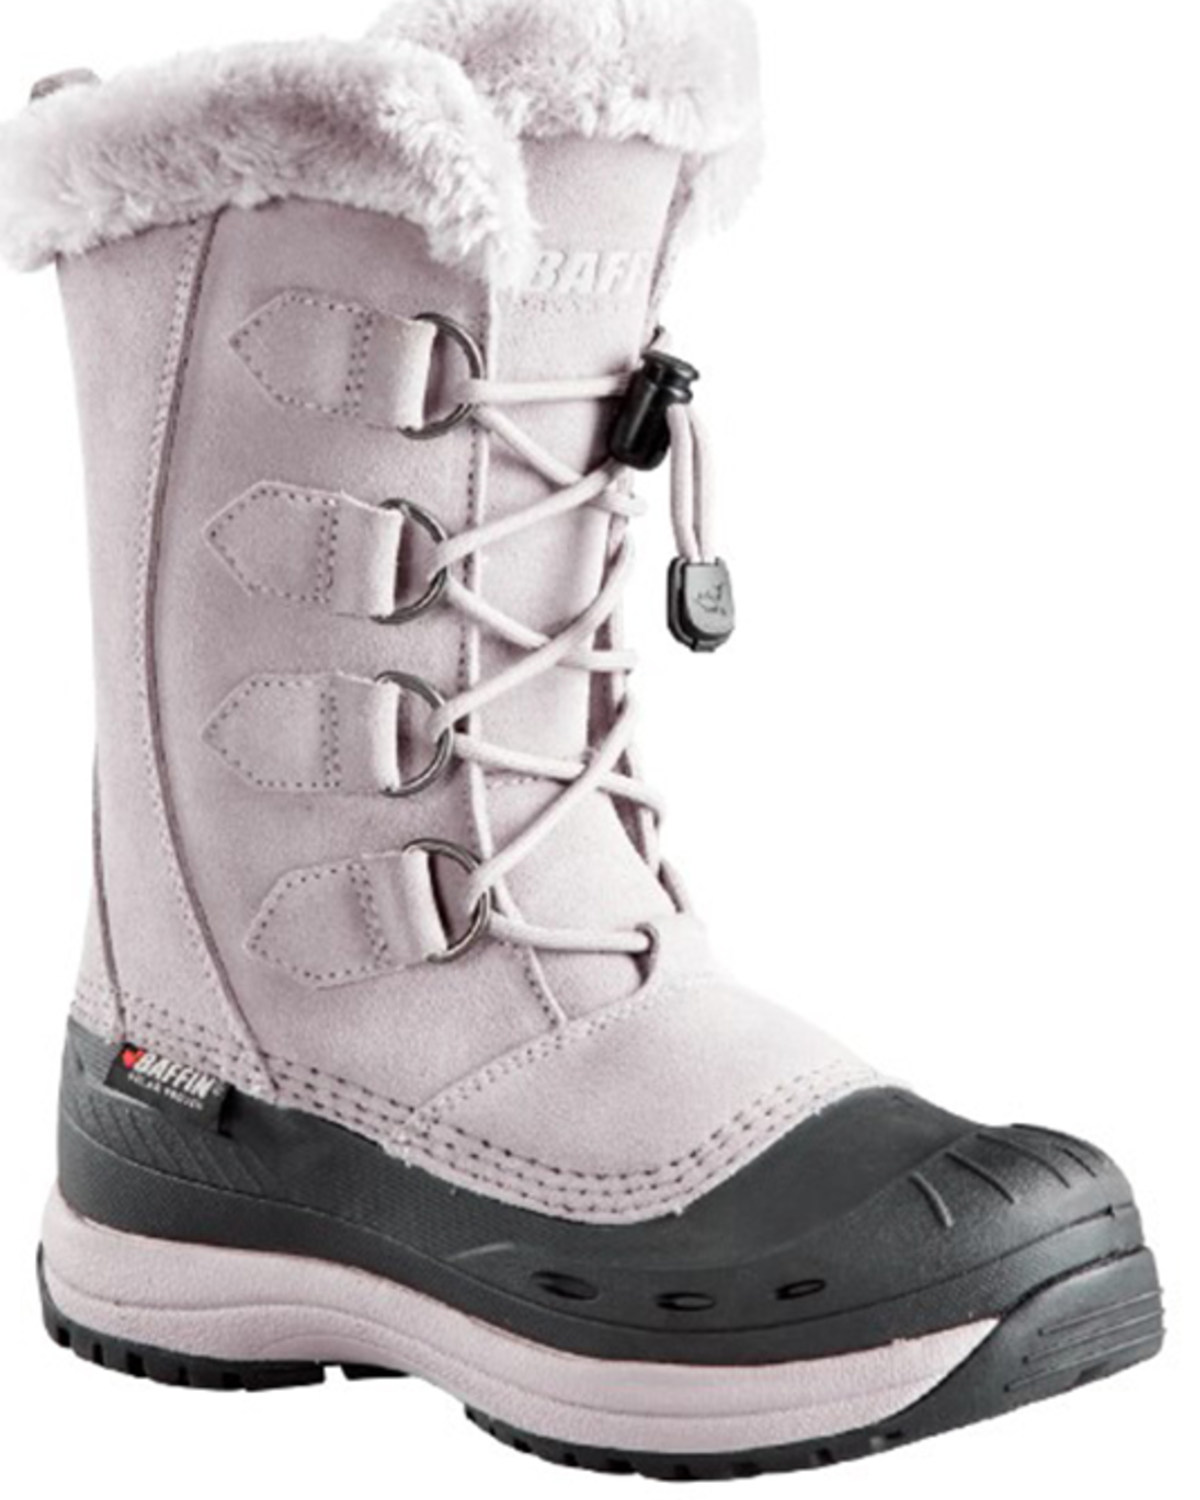 Baffin Women's Chloe Suede Leather Tundra Work Boots